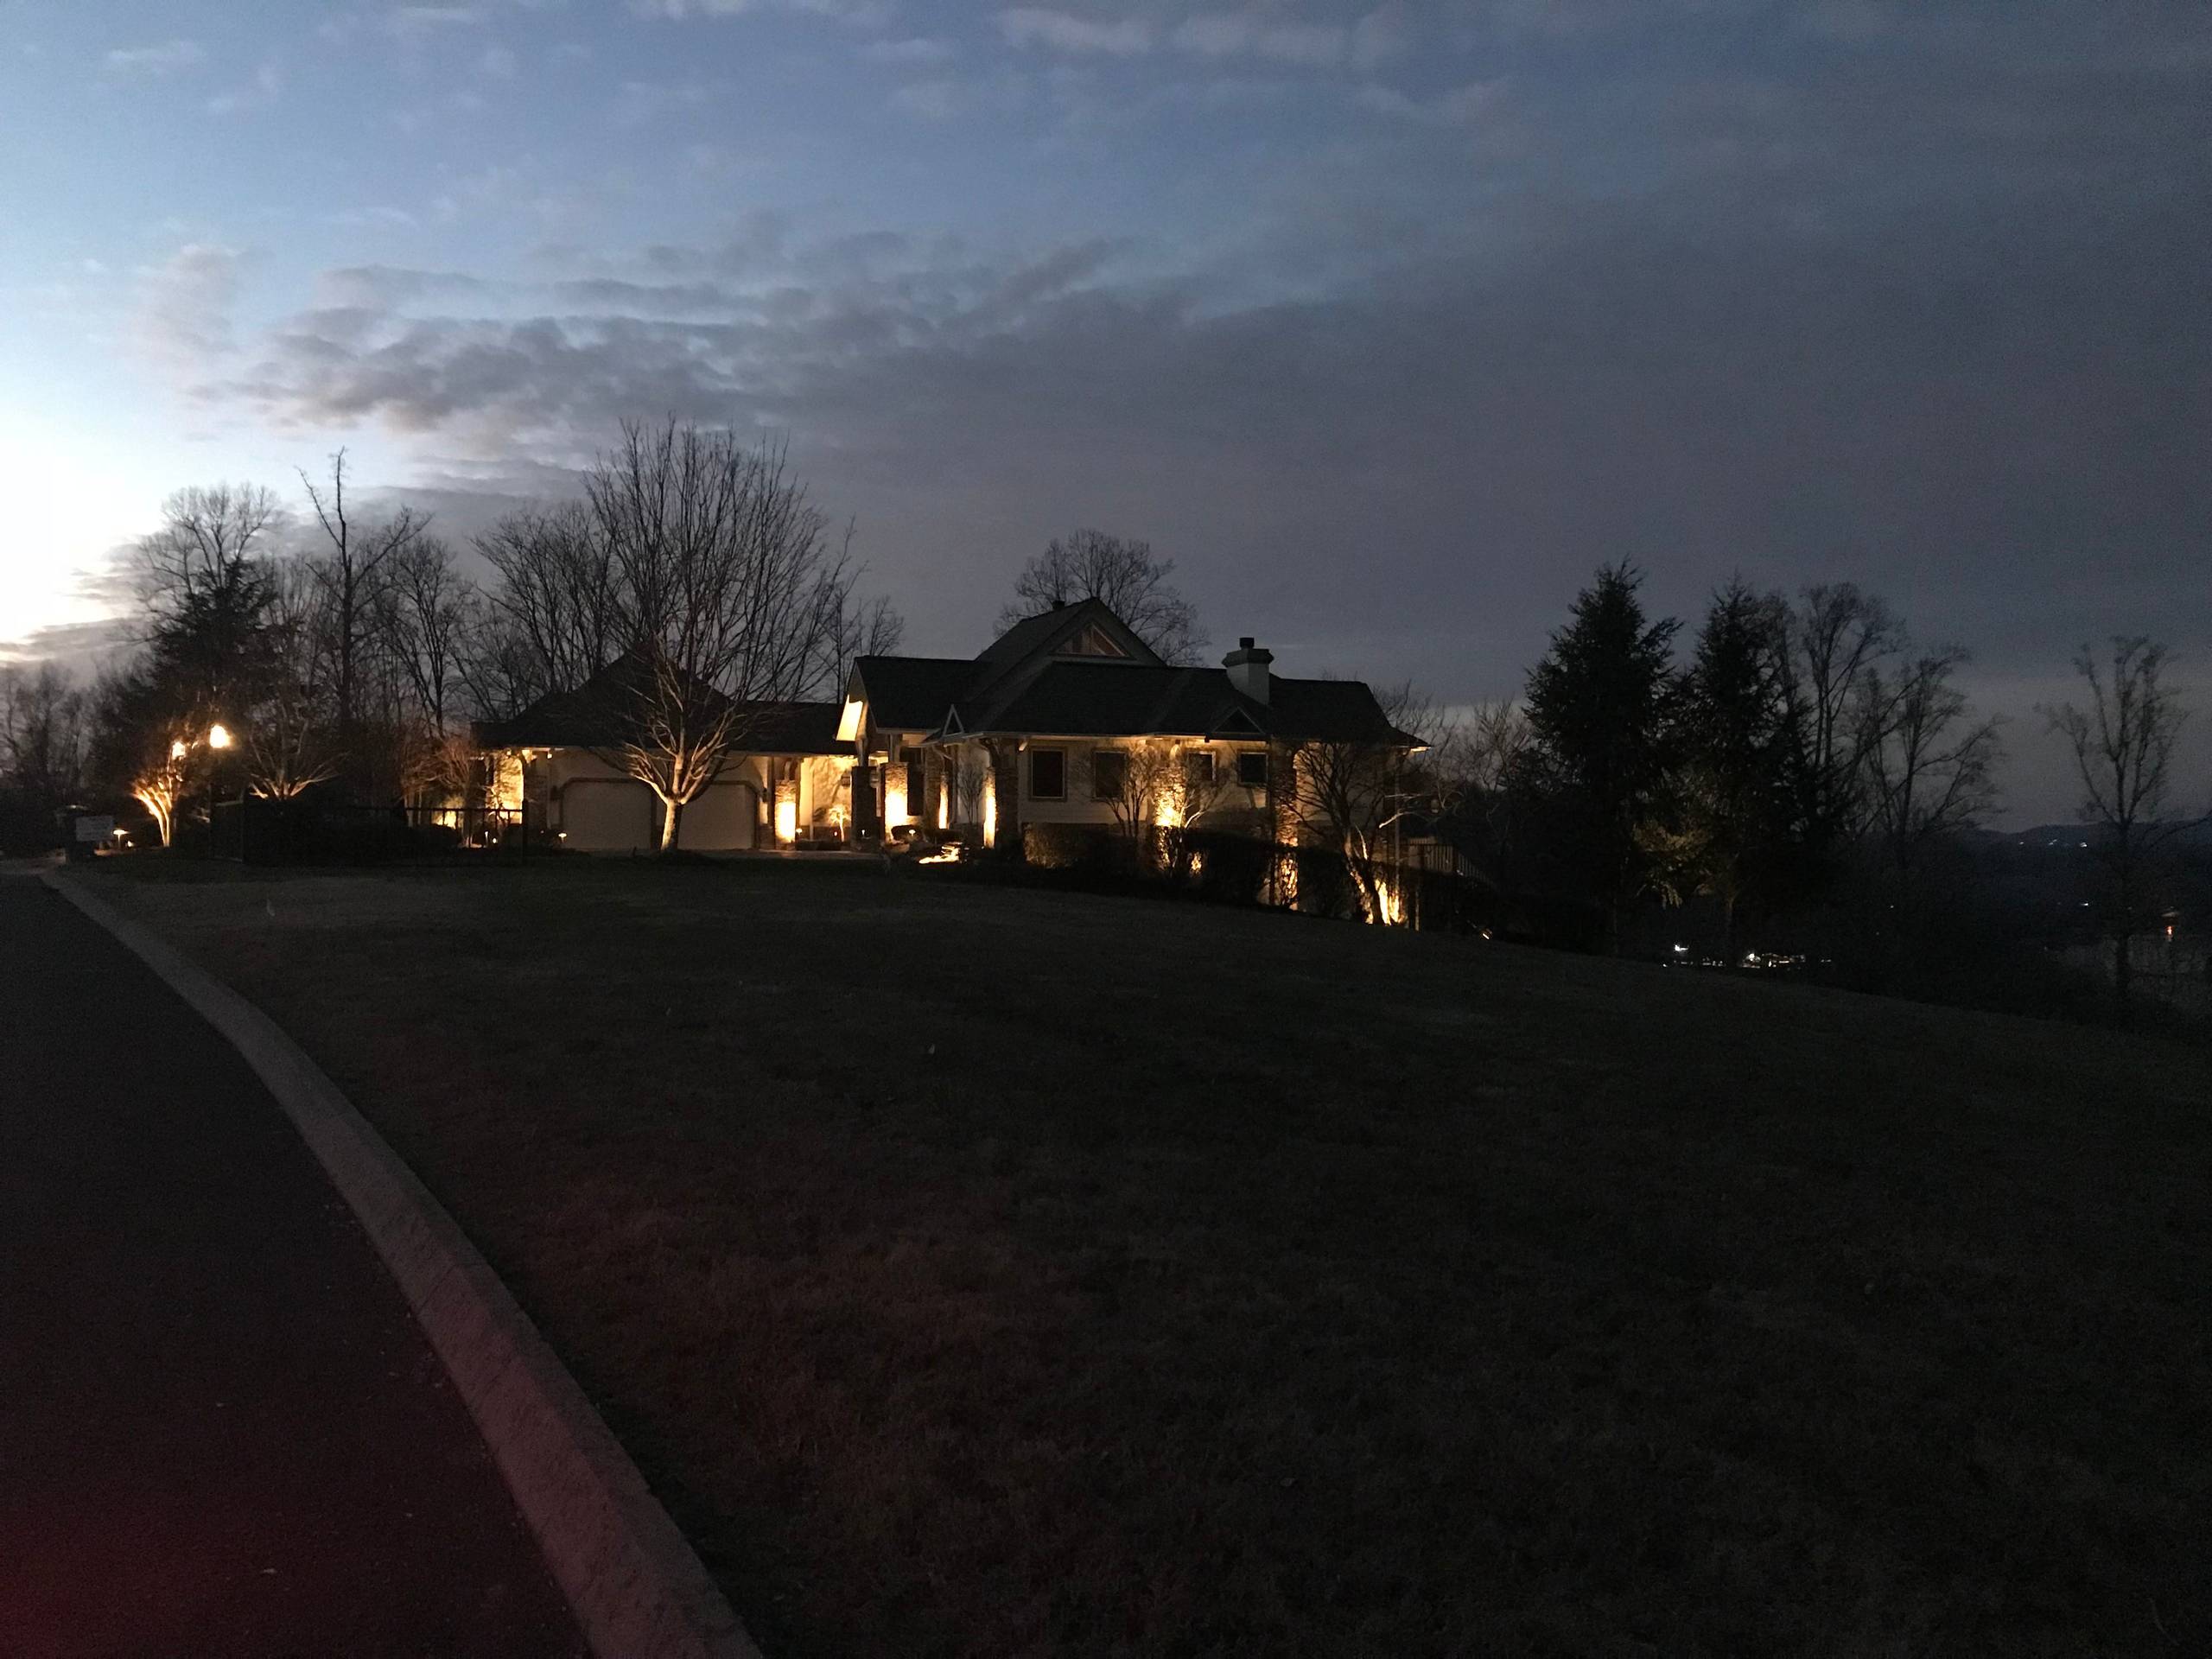 Front Yard Landscape and Lighting